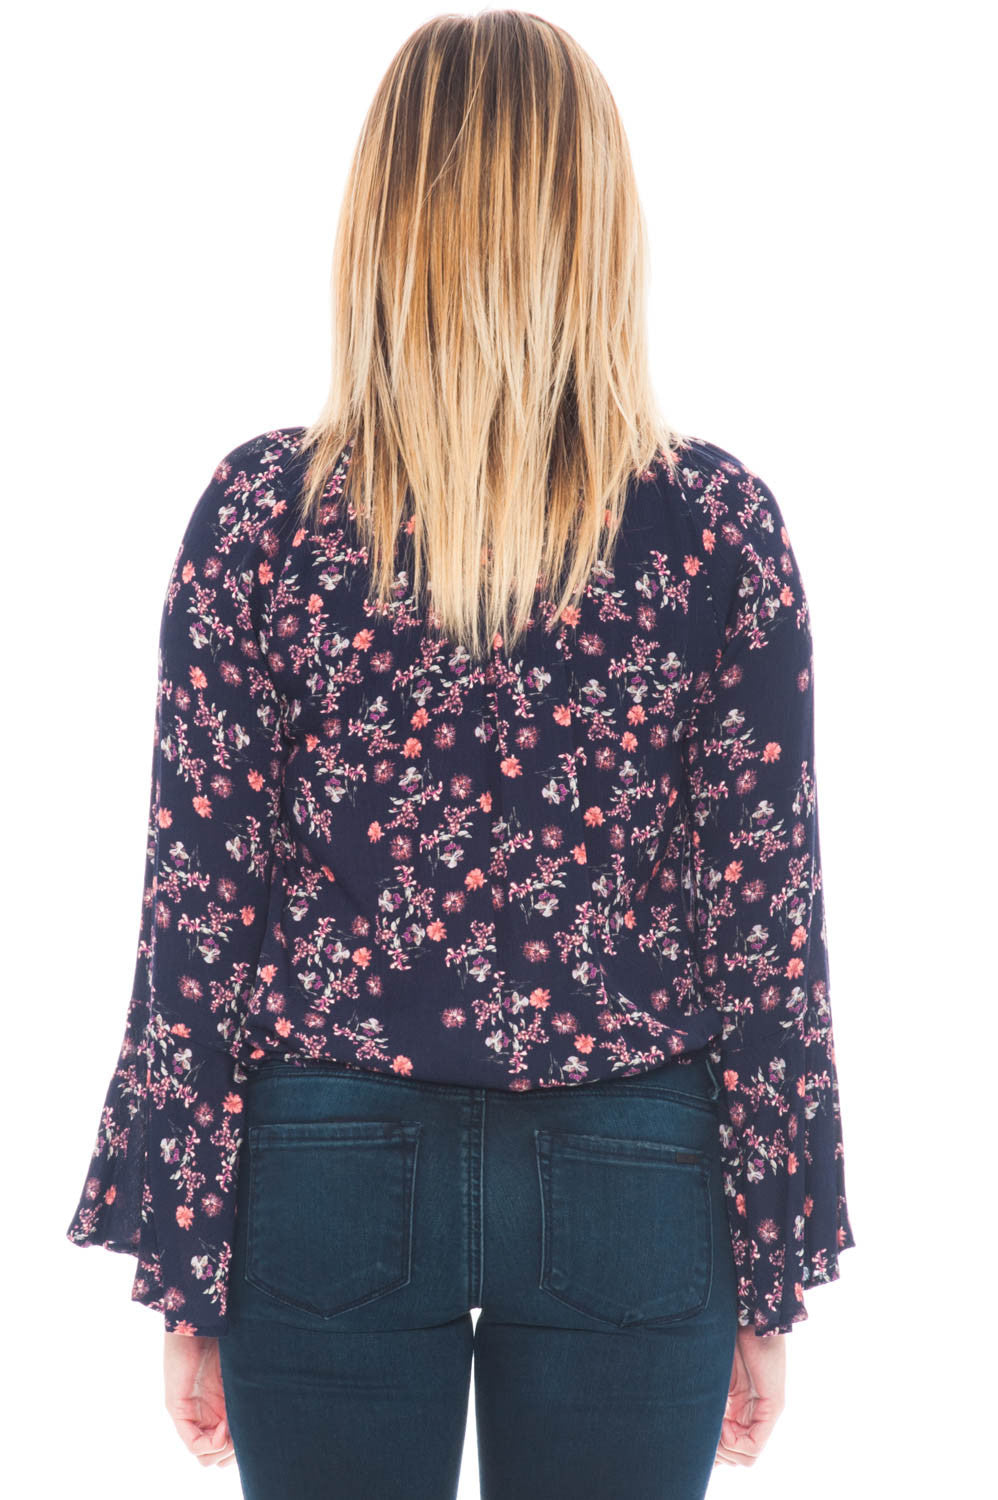 Blouse - Short Floral Bell Sleeve Top by Lush